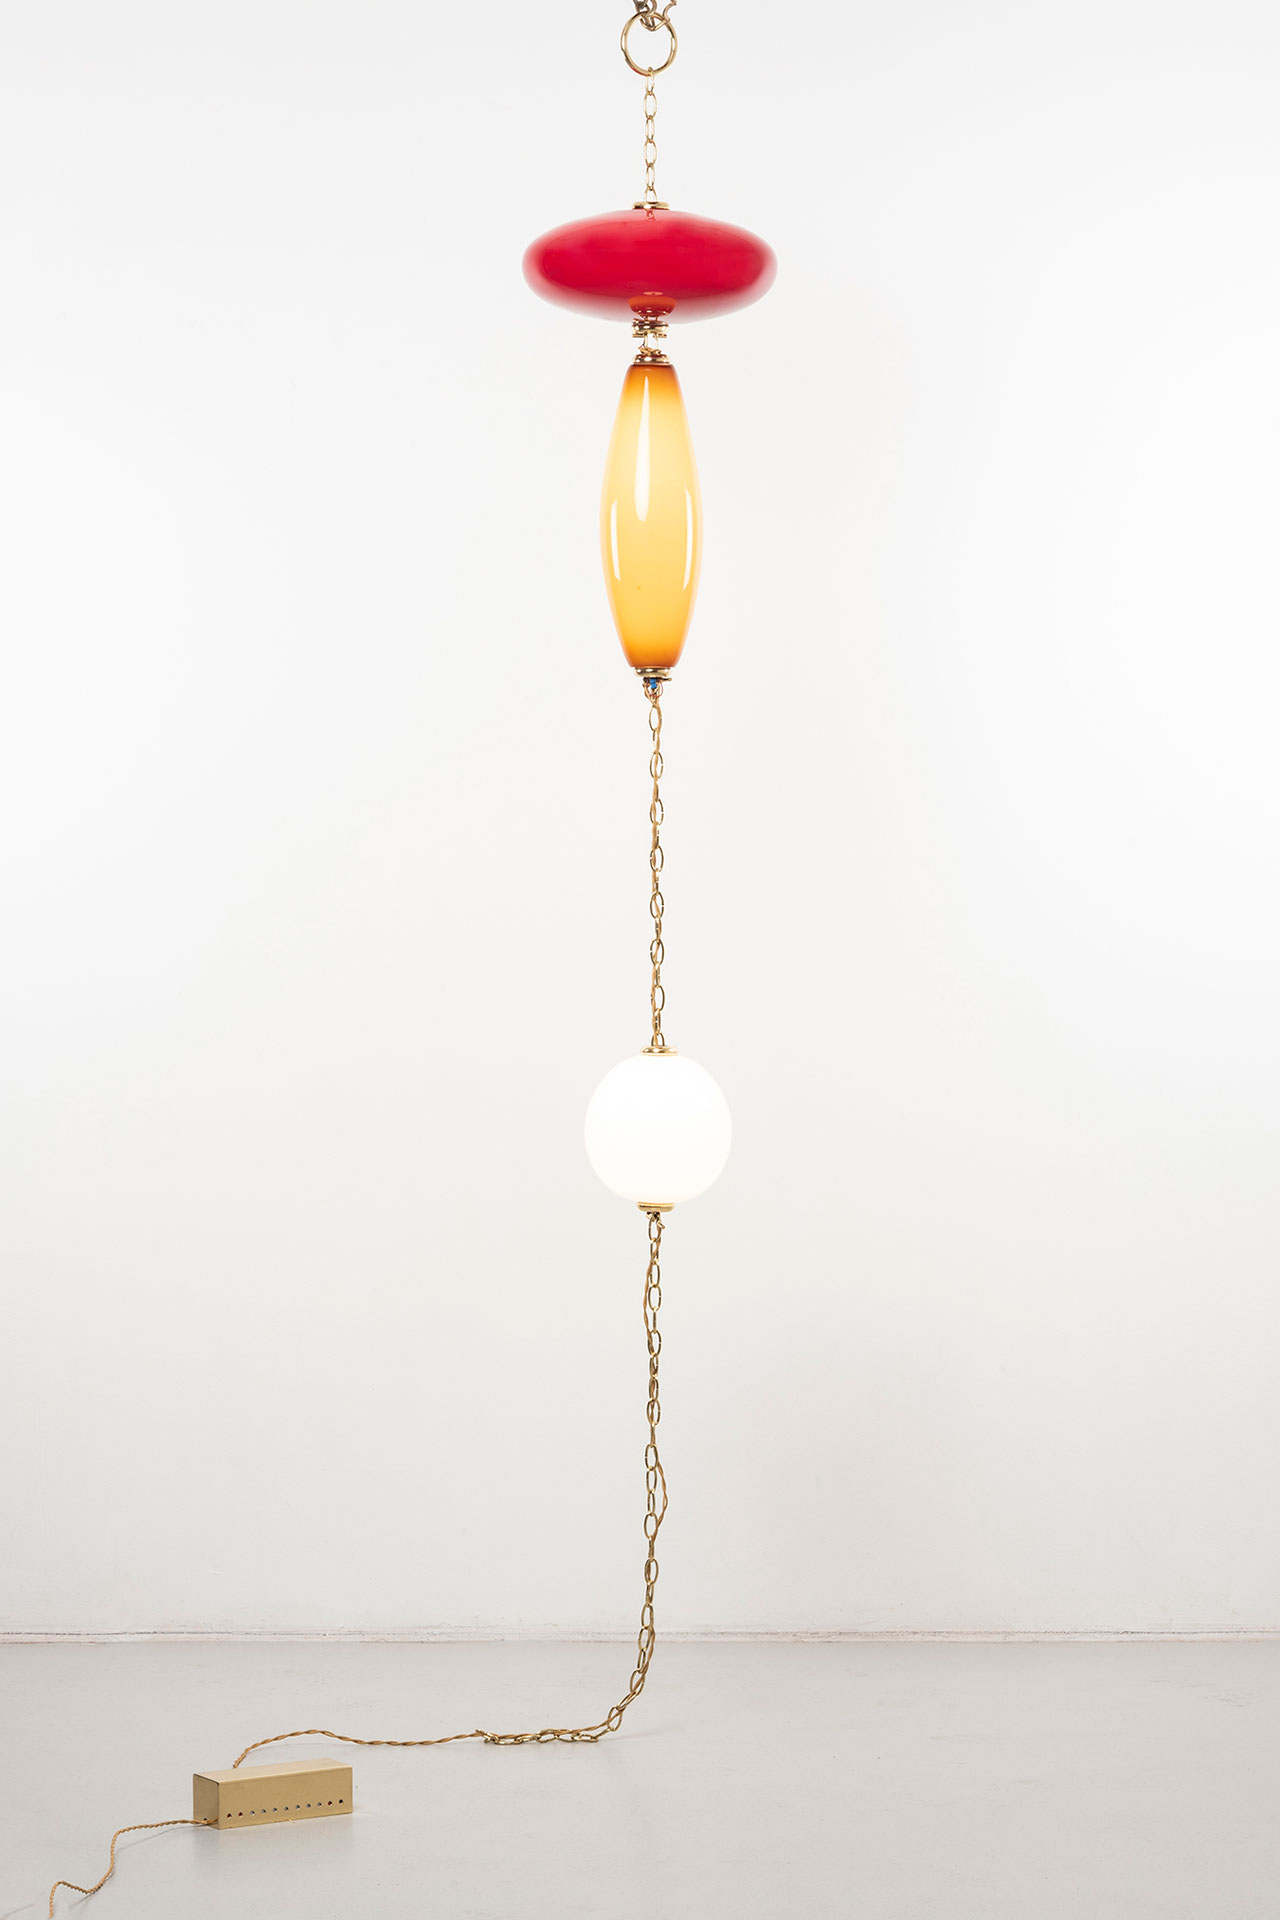 Ceiling Lamp Necklace by Analogia Project. Photography by Daniele Iodice.